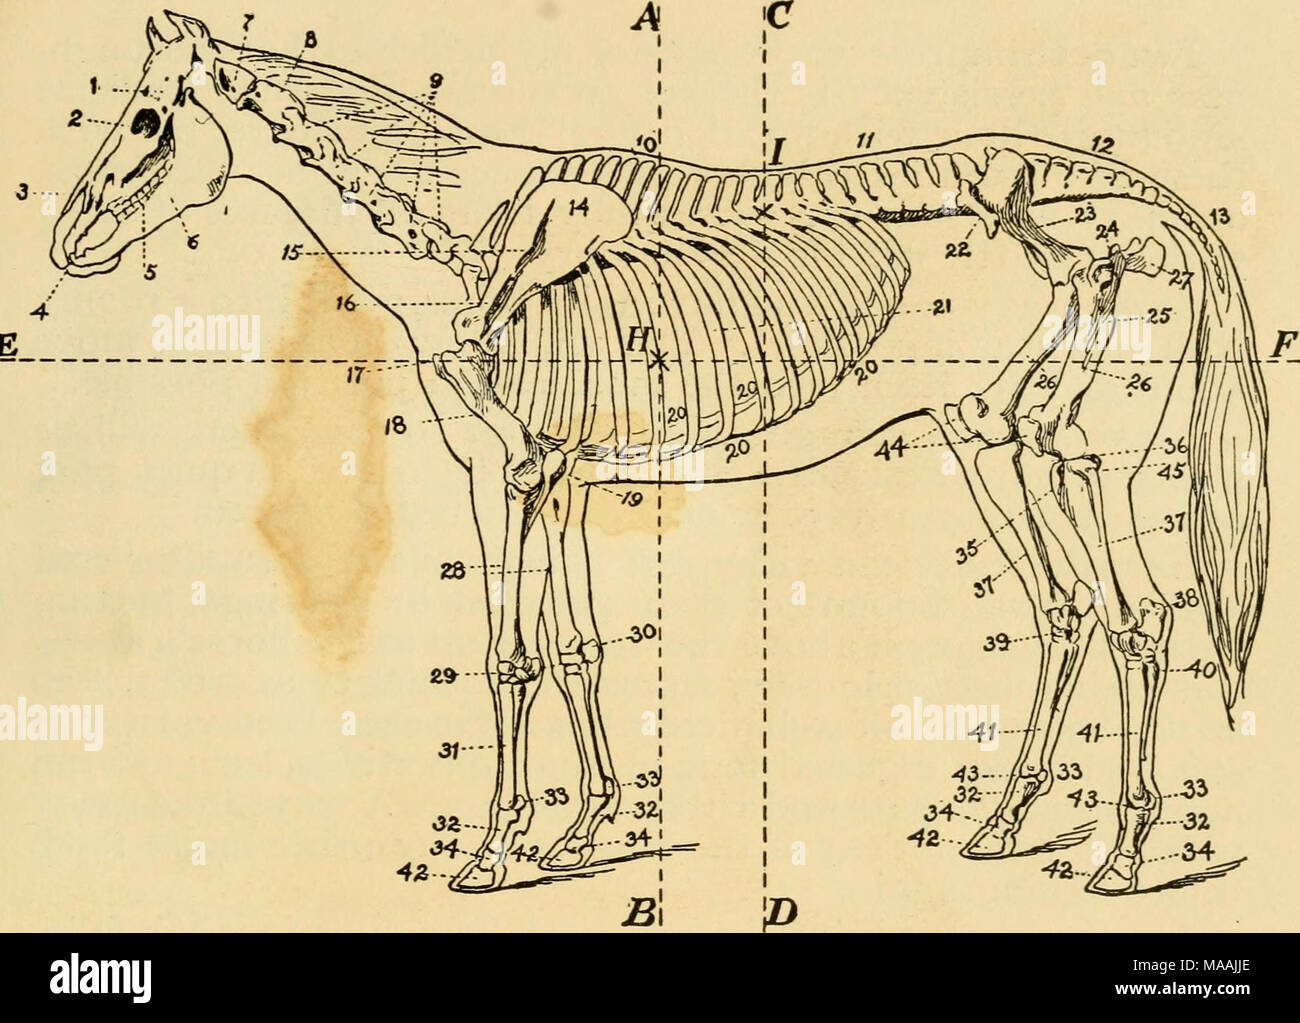 . Dr. Lesure's warranted veterinary remedies : the causes, symptoms and treatment of diseases for which they are recommended . The Skeleton of the Horse. Zygomatic arch. Eye cavity. Face bones. Incisor teeth. Molar teeth. Lower jaw. Atlas, ist vertebra of neck. Axis, 2d vertebra of neck. Cervical vertebrae (5). Spinal processes of back. Dorsal and lumbar vertebrae. Sacrum. Tail bones. Shoulder blade. Acromion process. Hollow of shoulder blade. Upper end of arm bone. Arm bone or humerus. Elbow bone. Cartilages of the ribs. Ribs. Haunch. Haunch bone. 24. Great trochanter. 25. Small trochanter. 2 Stock Photo